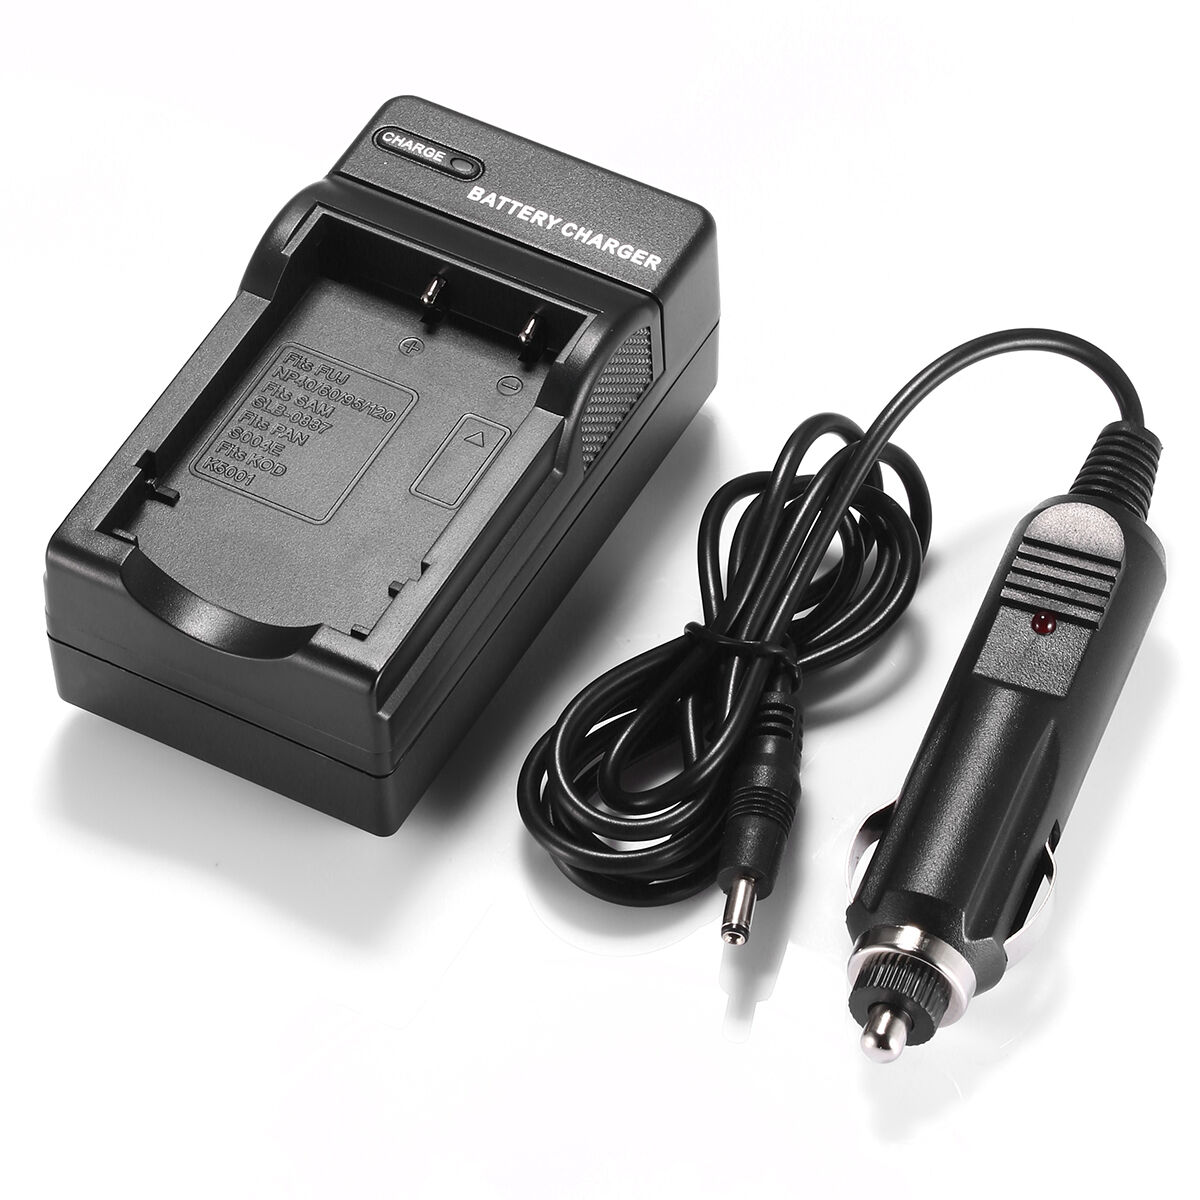 CASIO Exilim Zoom EX-Z250SR battery charger